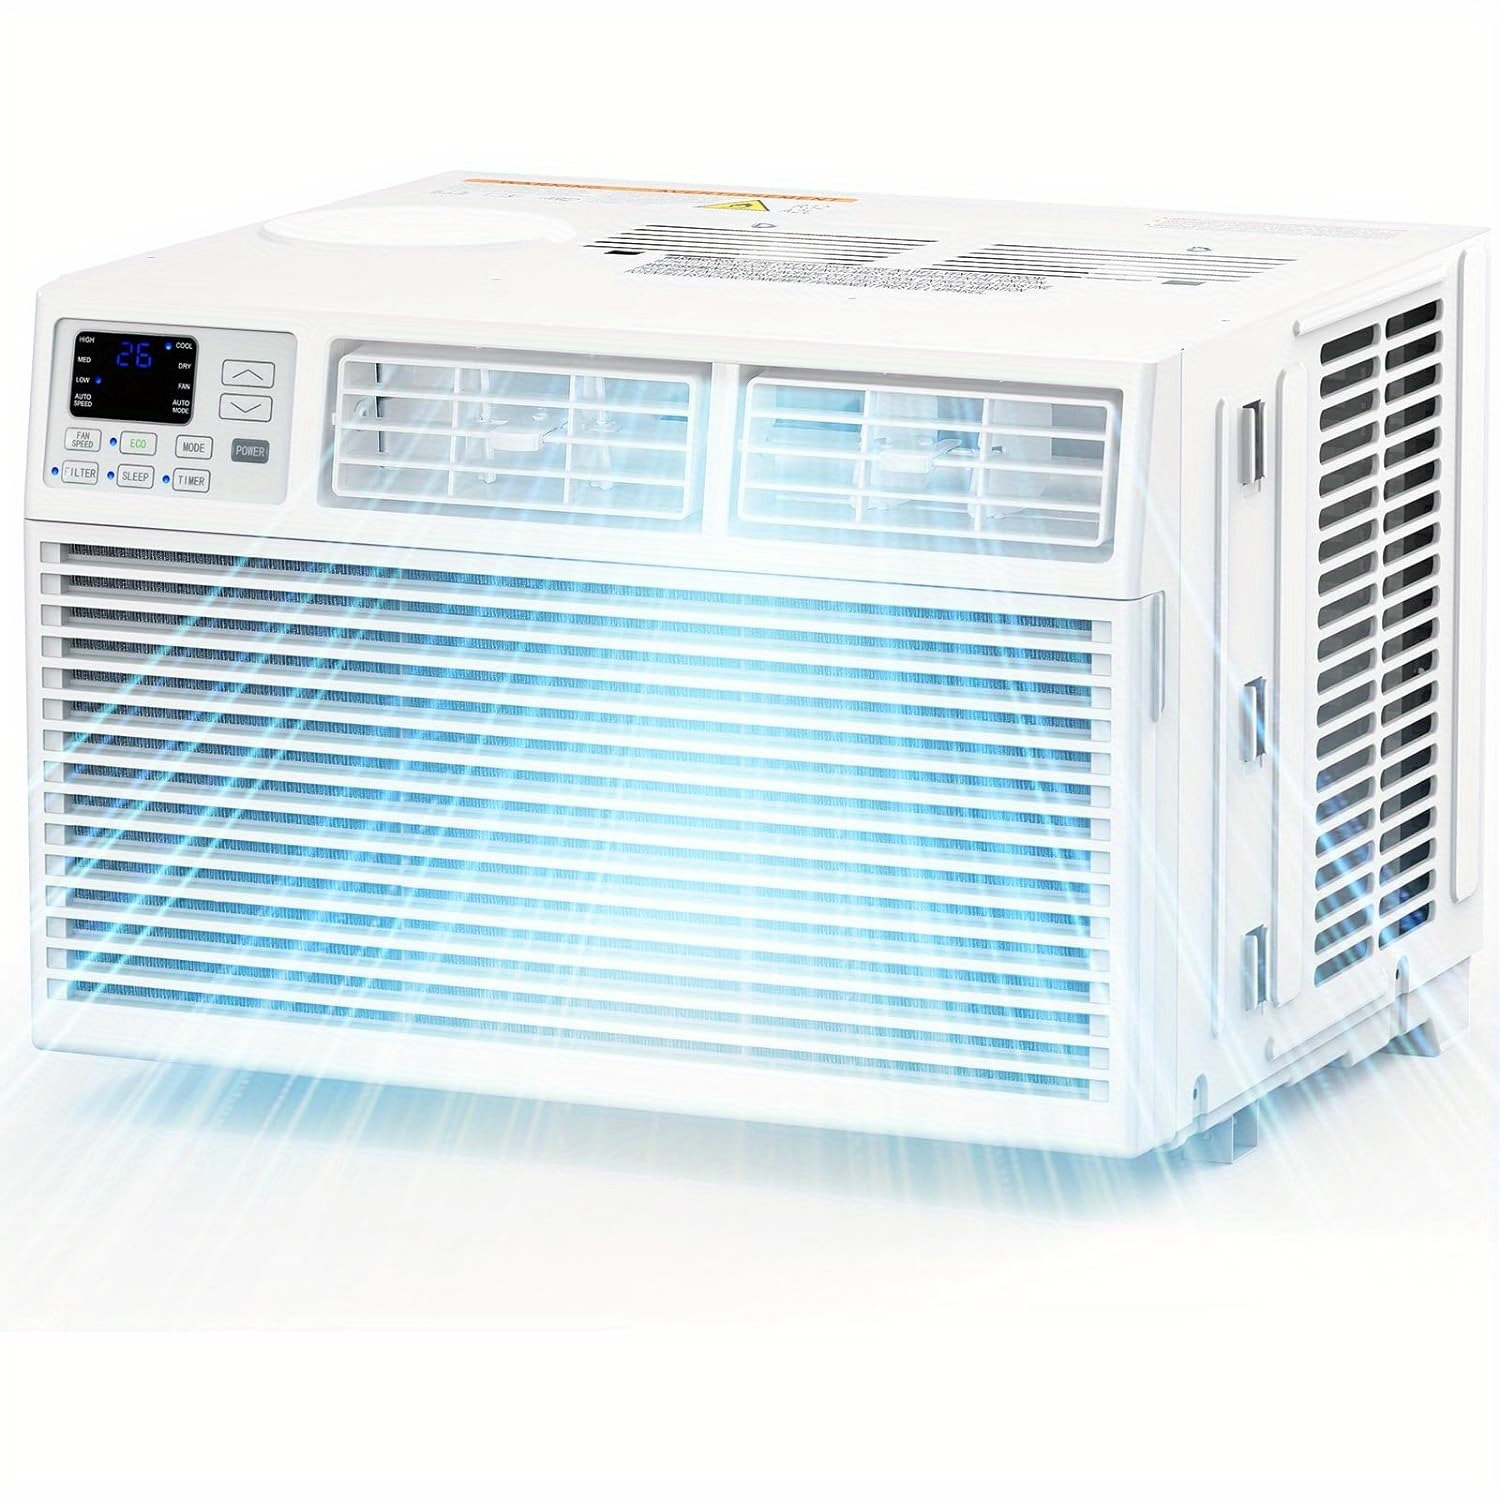 

8000 Btu Ahrae, Window Air Conditioner, Ac Unit With Remote Control For Rooms Up To 350 Sq Ft. High Cooling Capacity, 4 Modes, Led Display, 24h Timer, Reusable Filter, Easy Install Kit, 4, 300